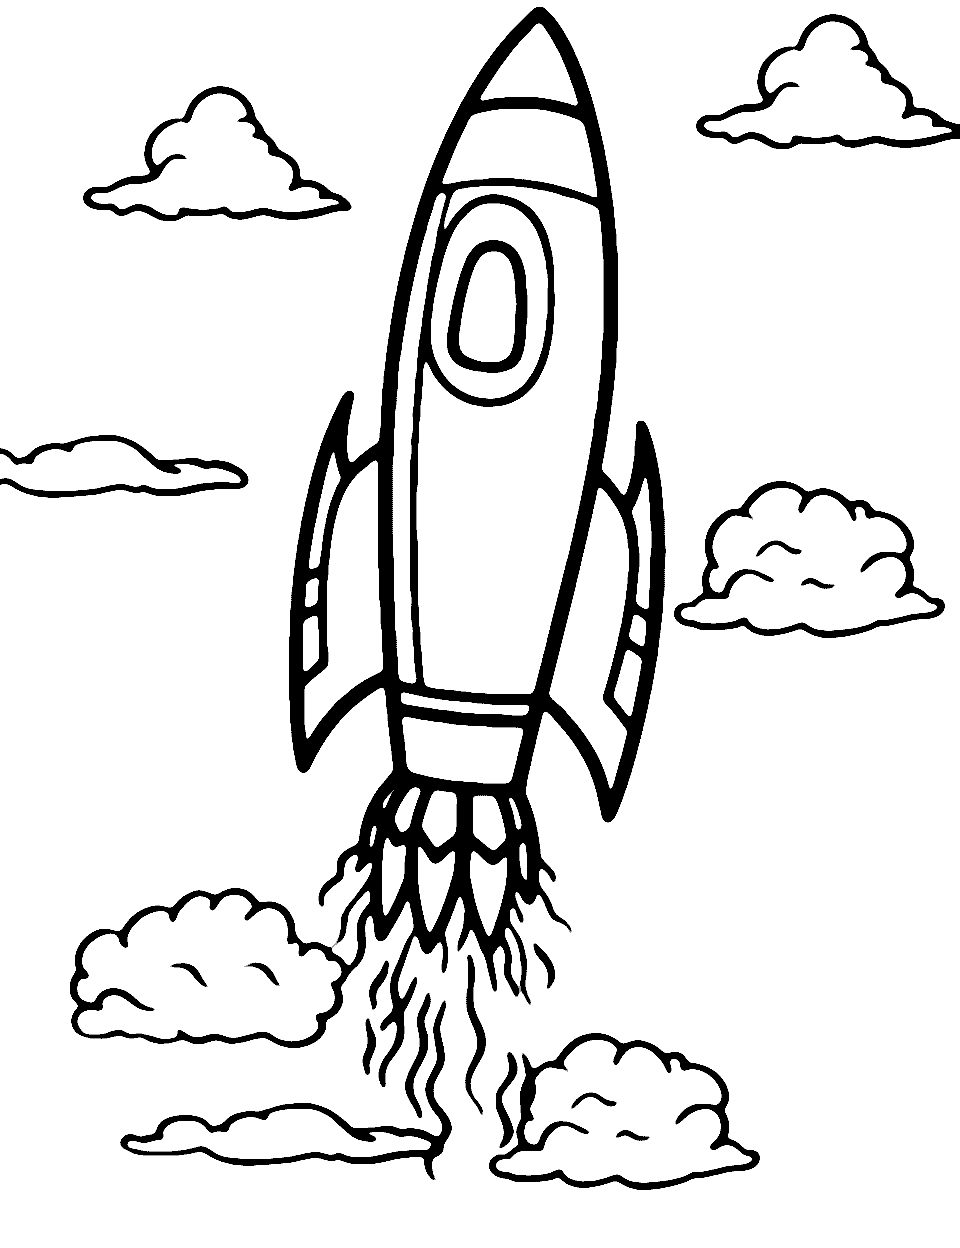 Rockets colouring pages for kids - zoonki.com